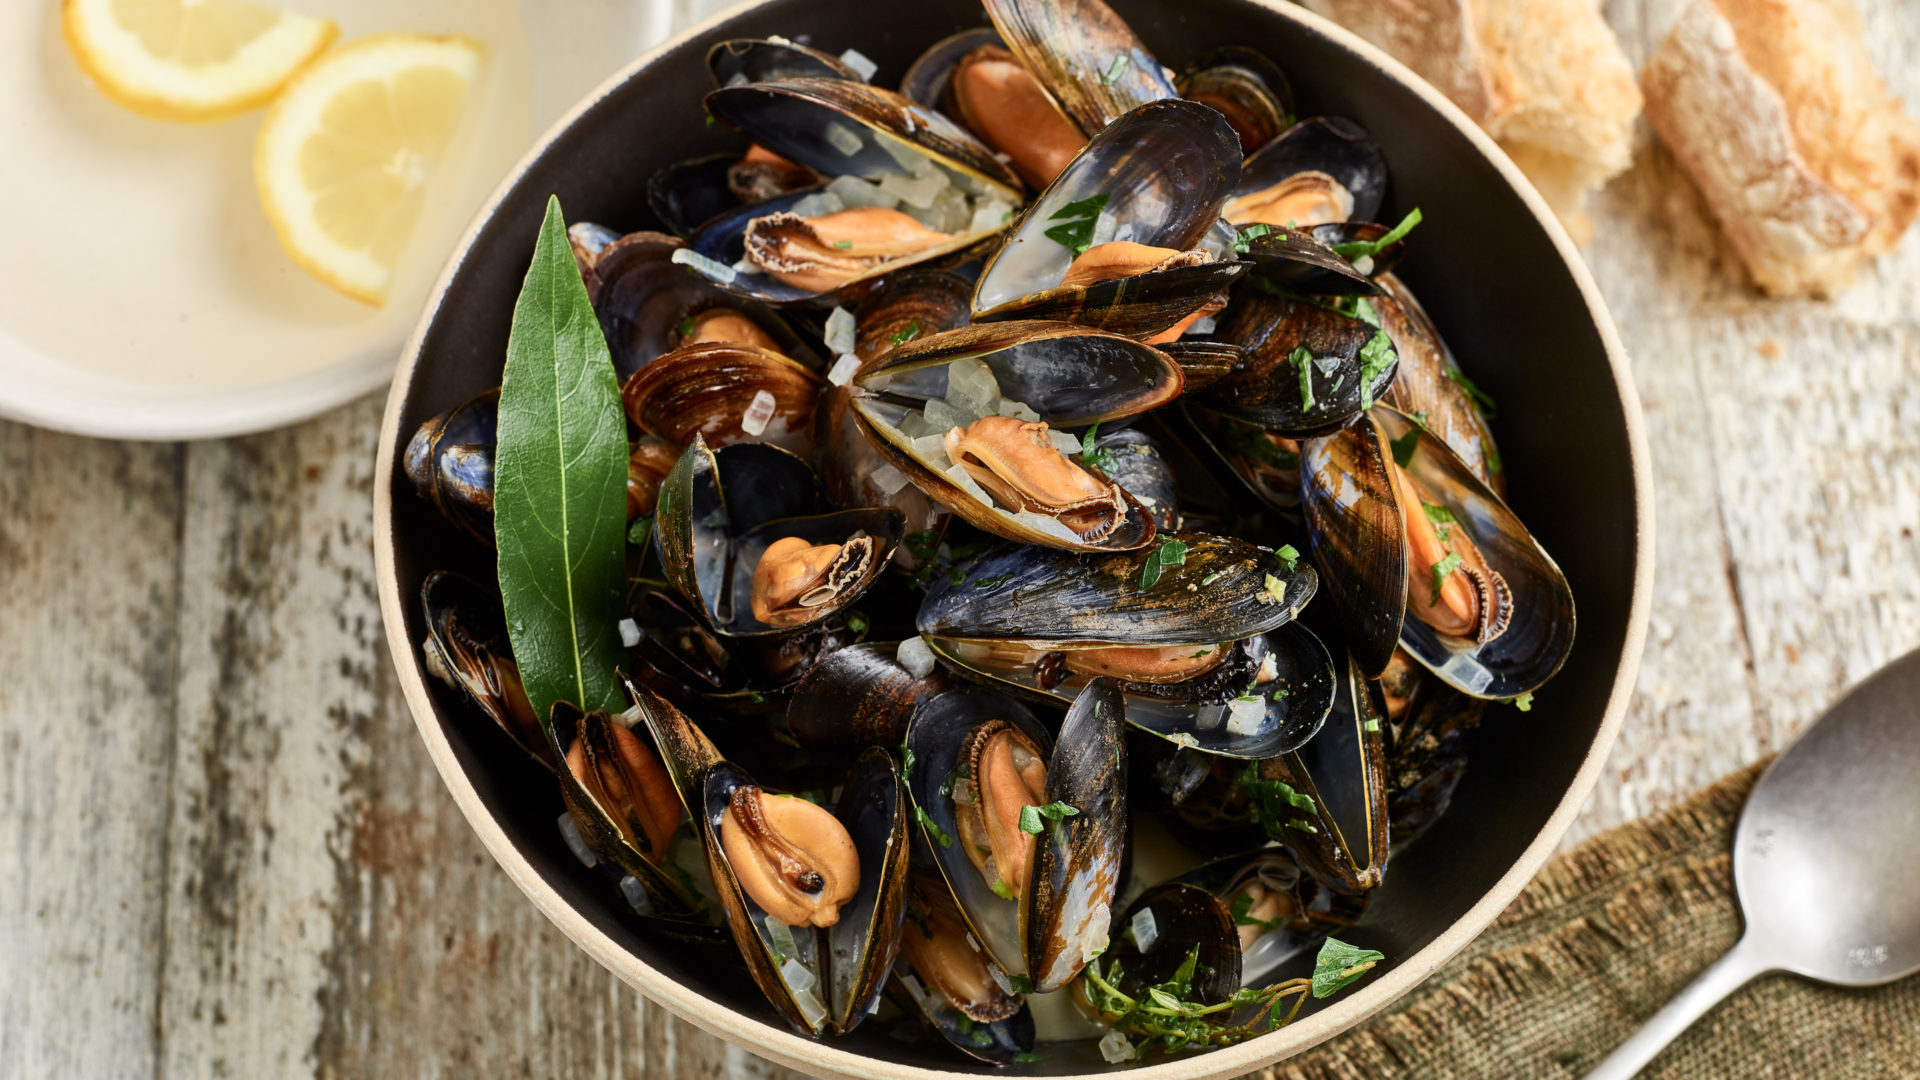 Mussels Moules mariniere